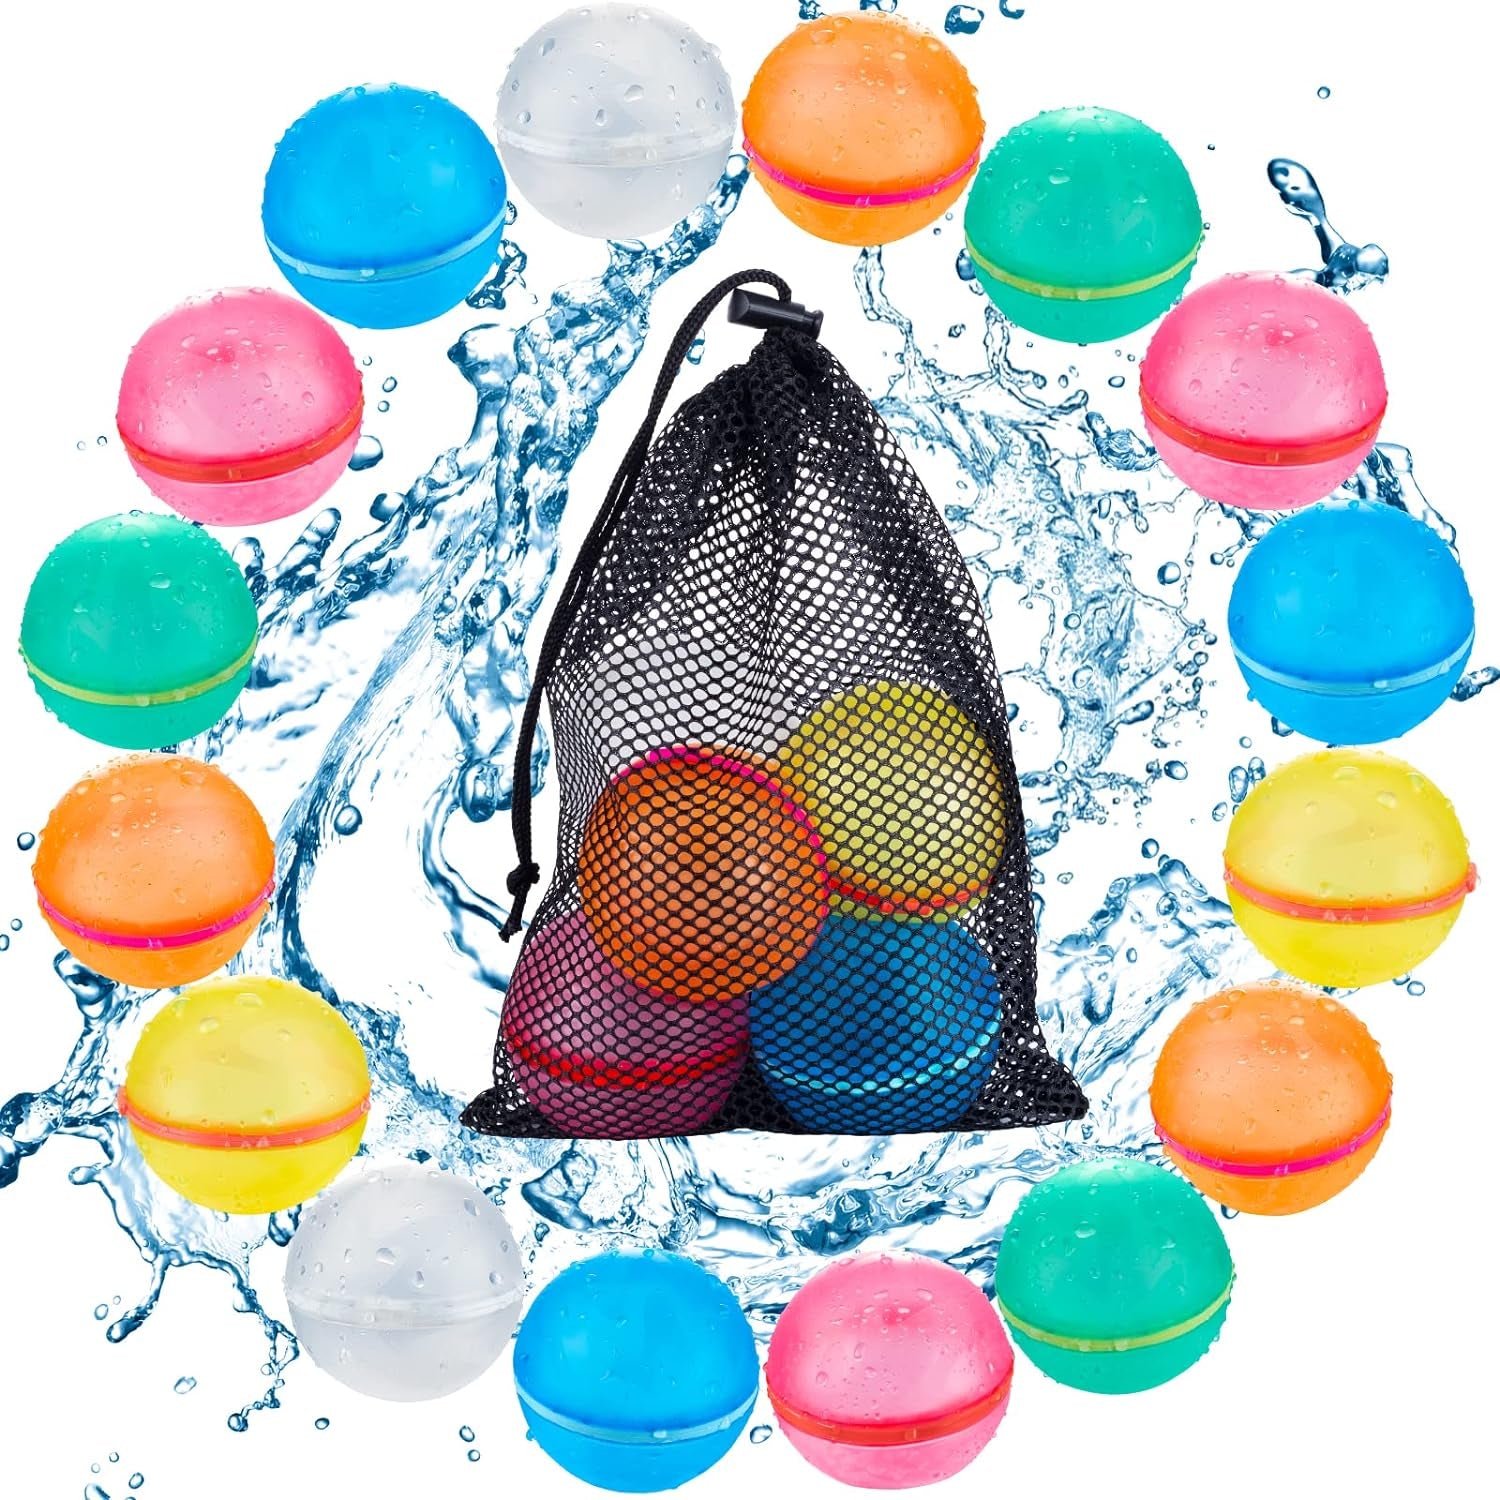 16 PCS Reusable Water Balloons, Refillable Magnetic Water Balls for Outdoor Games, Self Sealing Water Splash Bomb Quick Fill for Summer Fun, Pool Beach Toys for Kids Ages 3-12